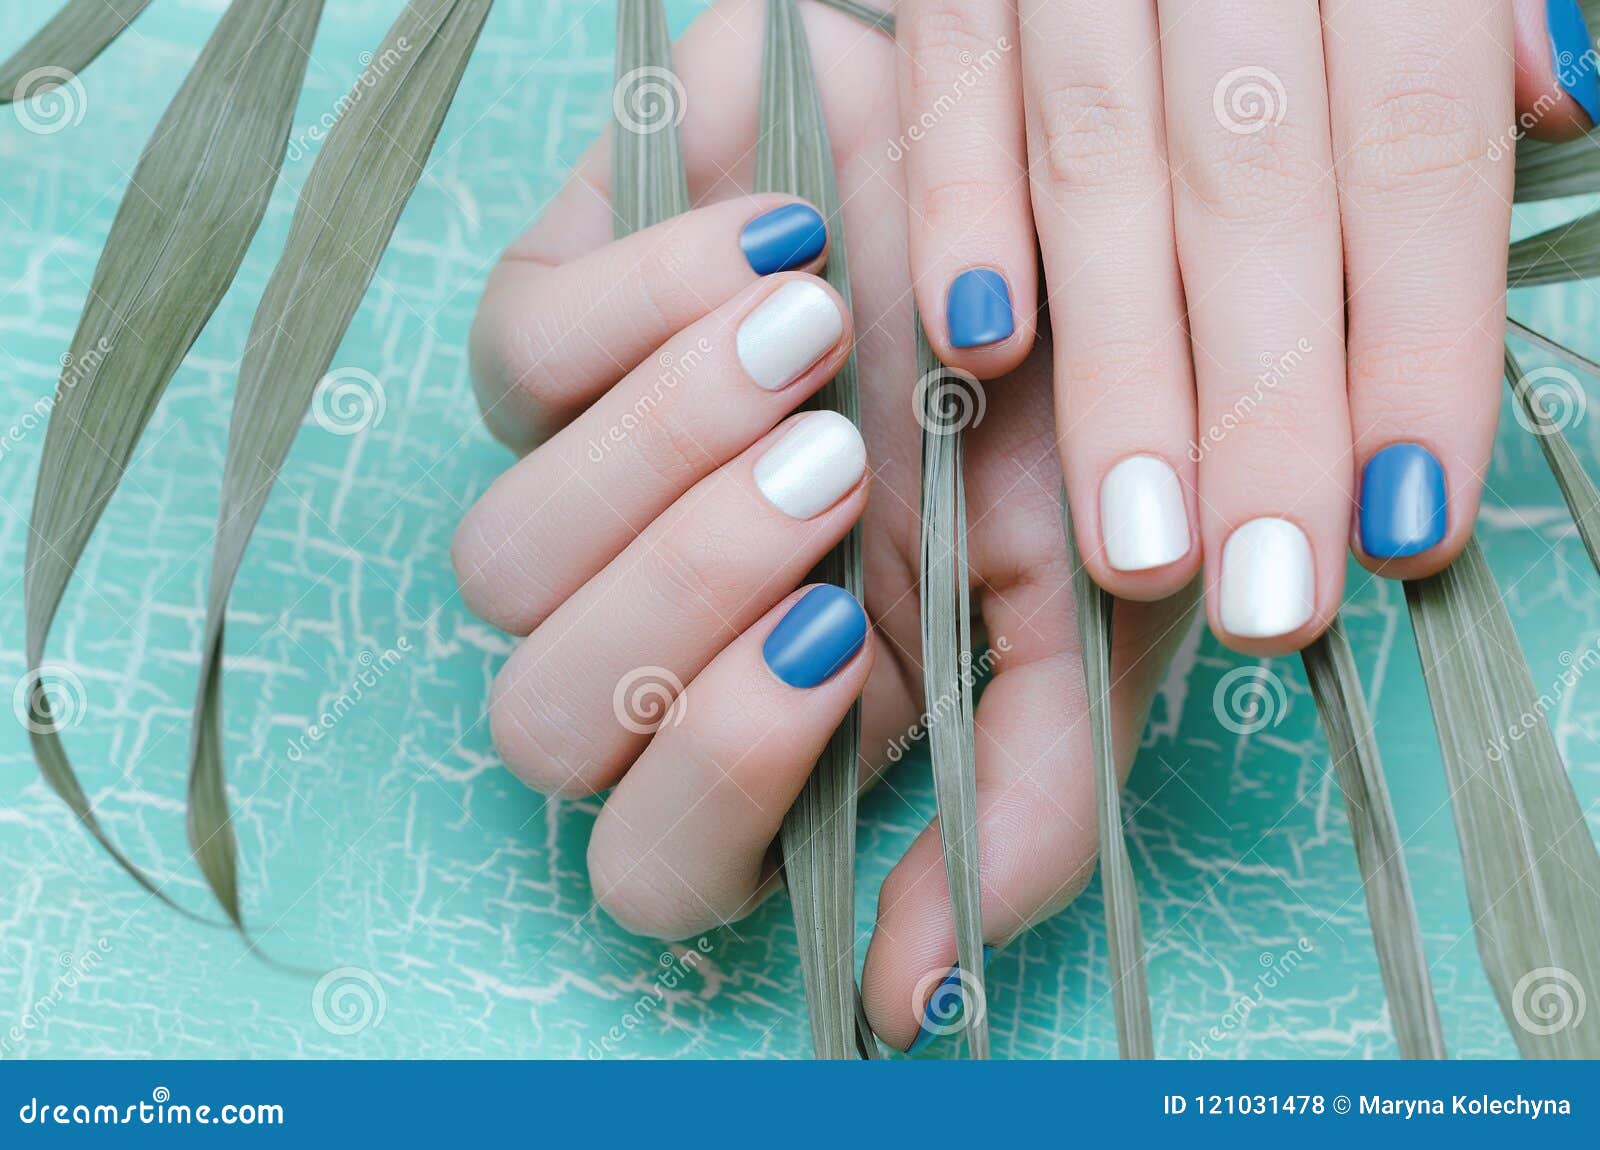 8. Nail Design Tips for Using Maroon and Blue Together - wide 2